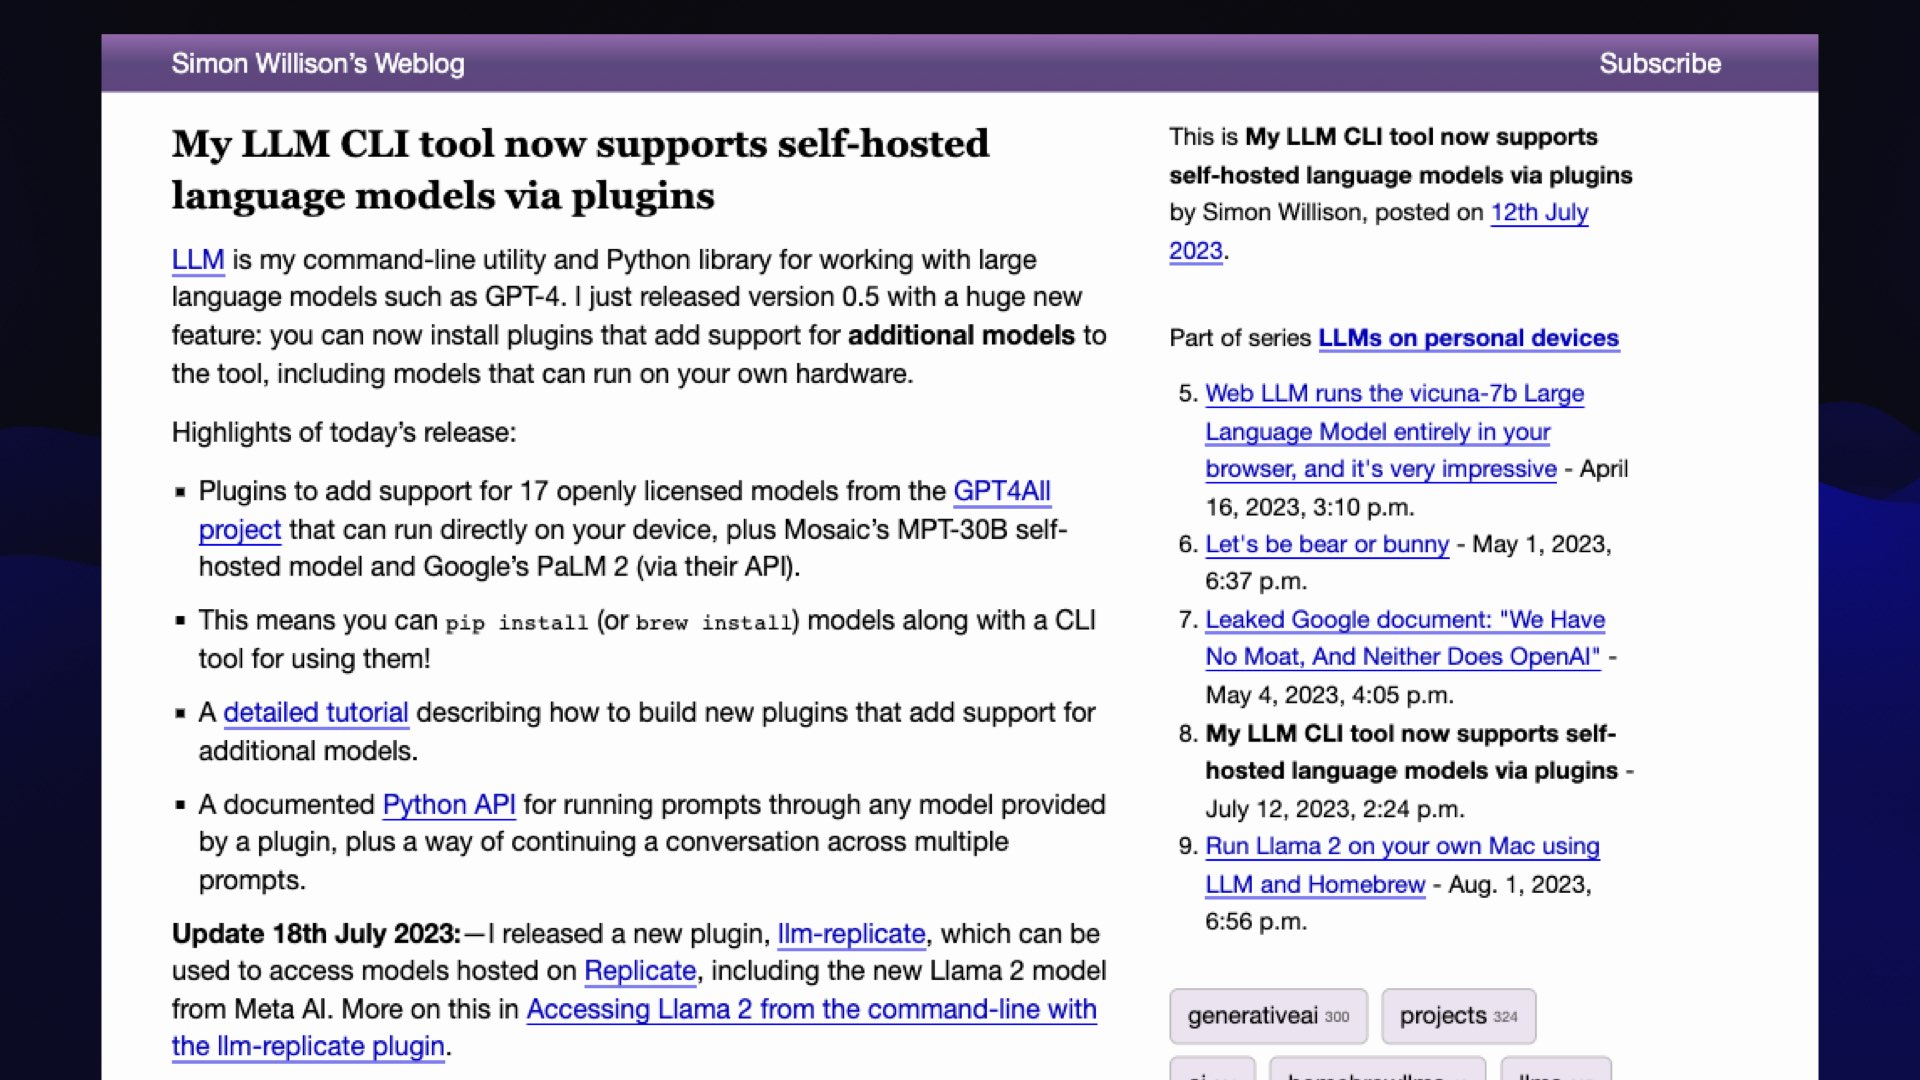 Simon Willison’s Weblog: My LLM CLI tool now supports self-hosted language models via plugins  12th July 2023